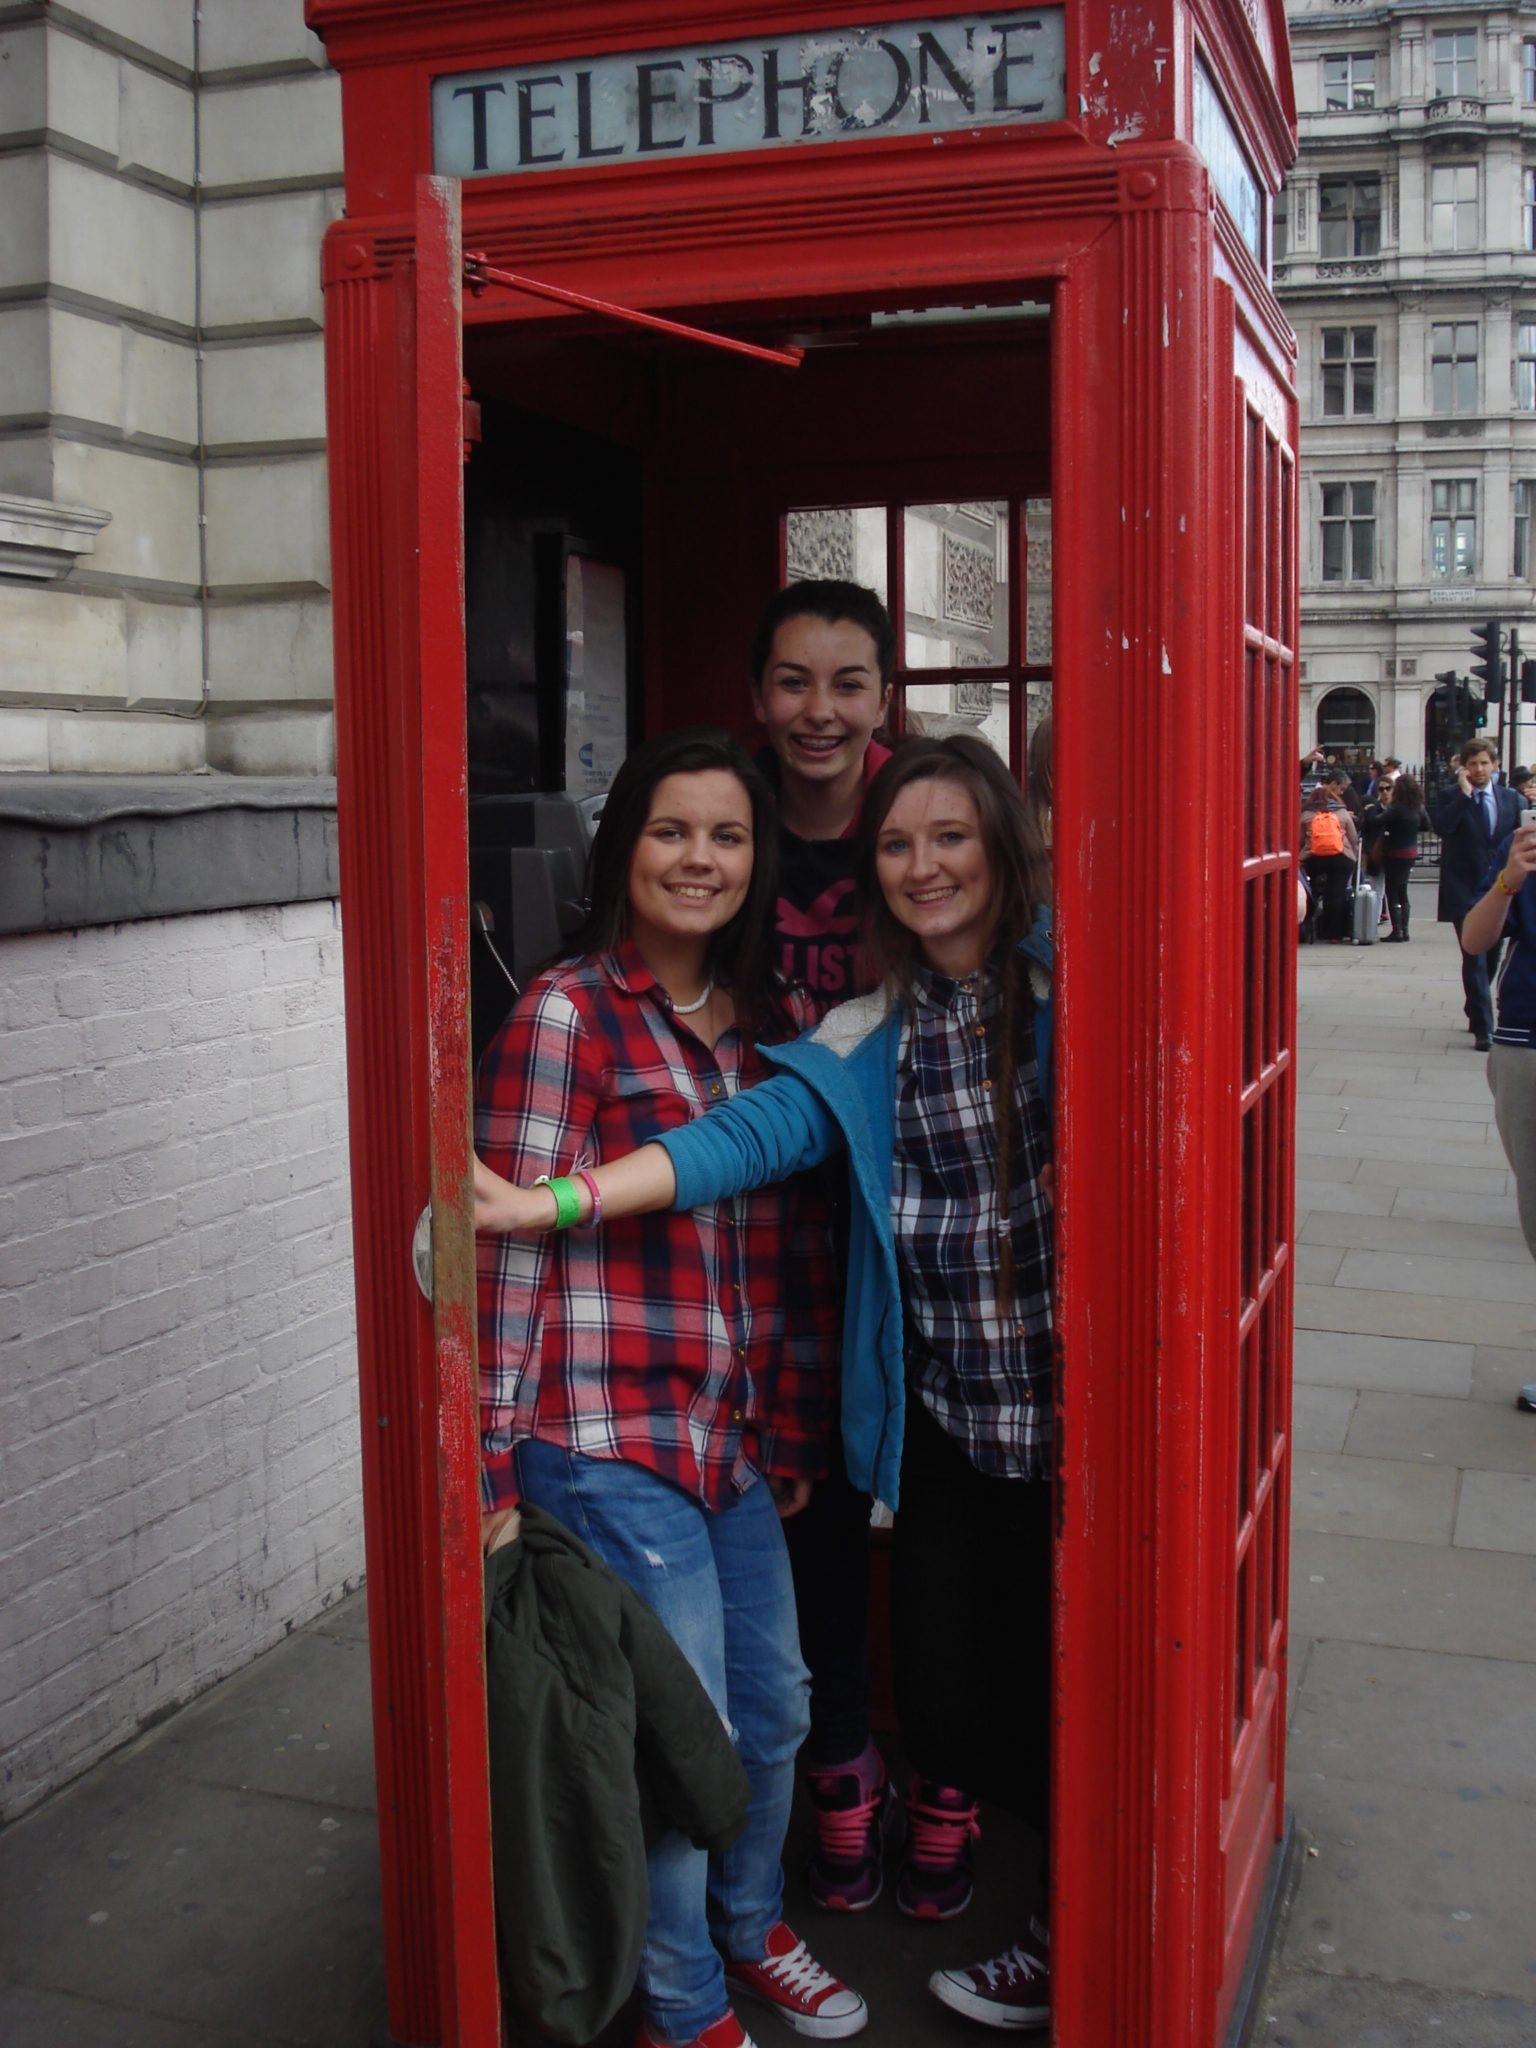 desmond college transition year trip to london: Lauren Moloney, Stacey Flynn and Sarah Flatley, April 2015